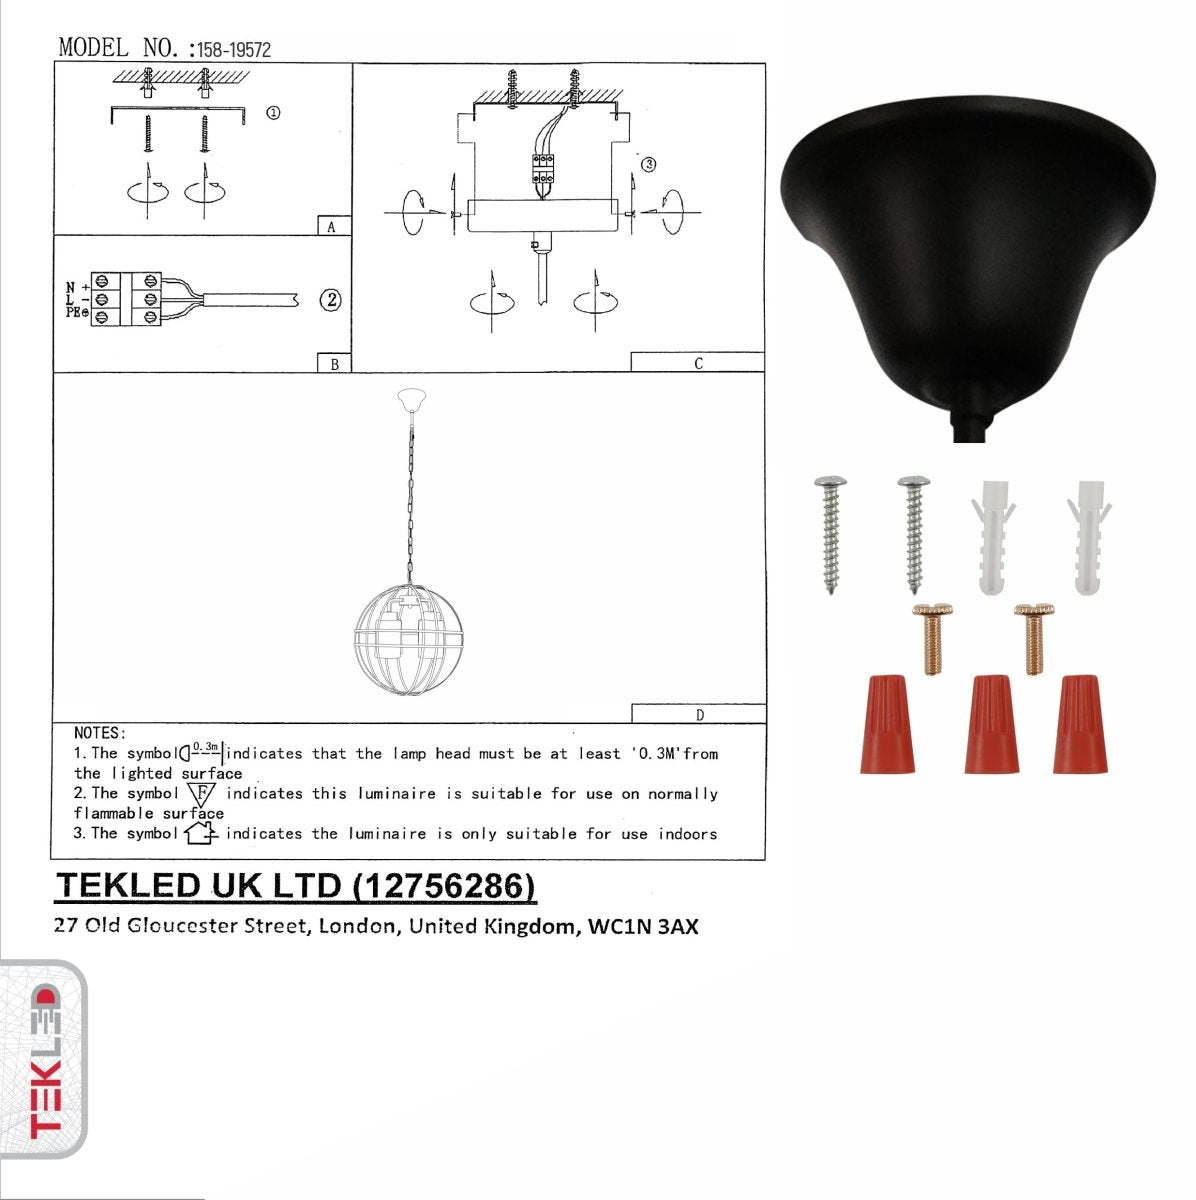 User manual for Amber Cylinder Glass Black Cage Metal Chandelier with 4xE27 Fitting | TEKLED 158-19572